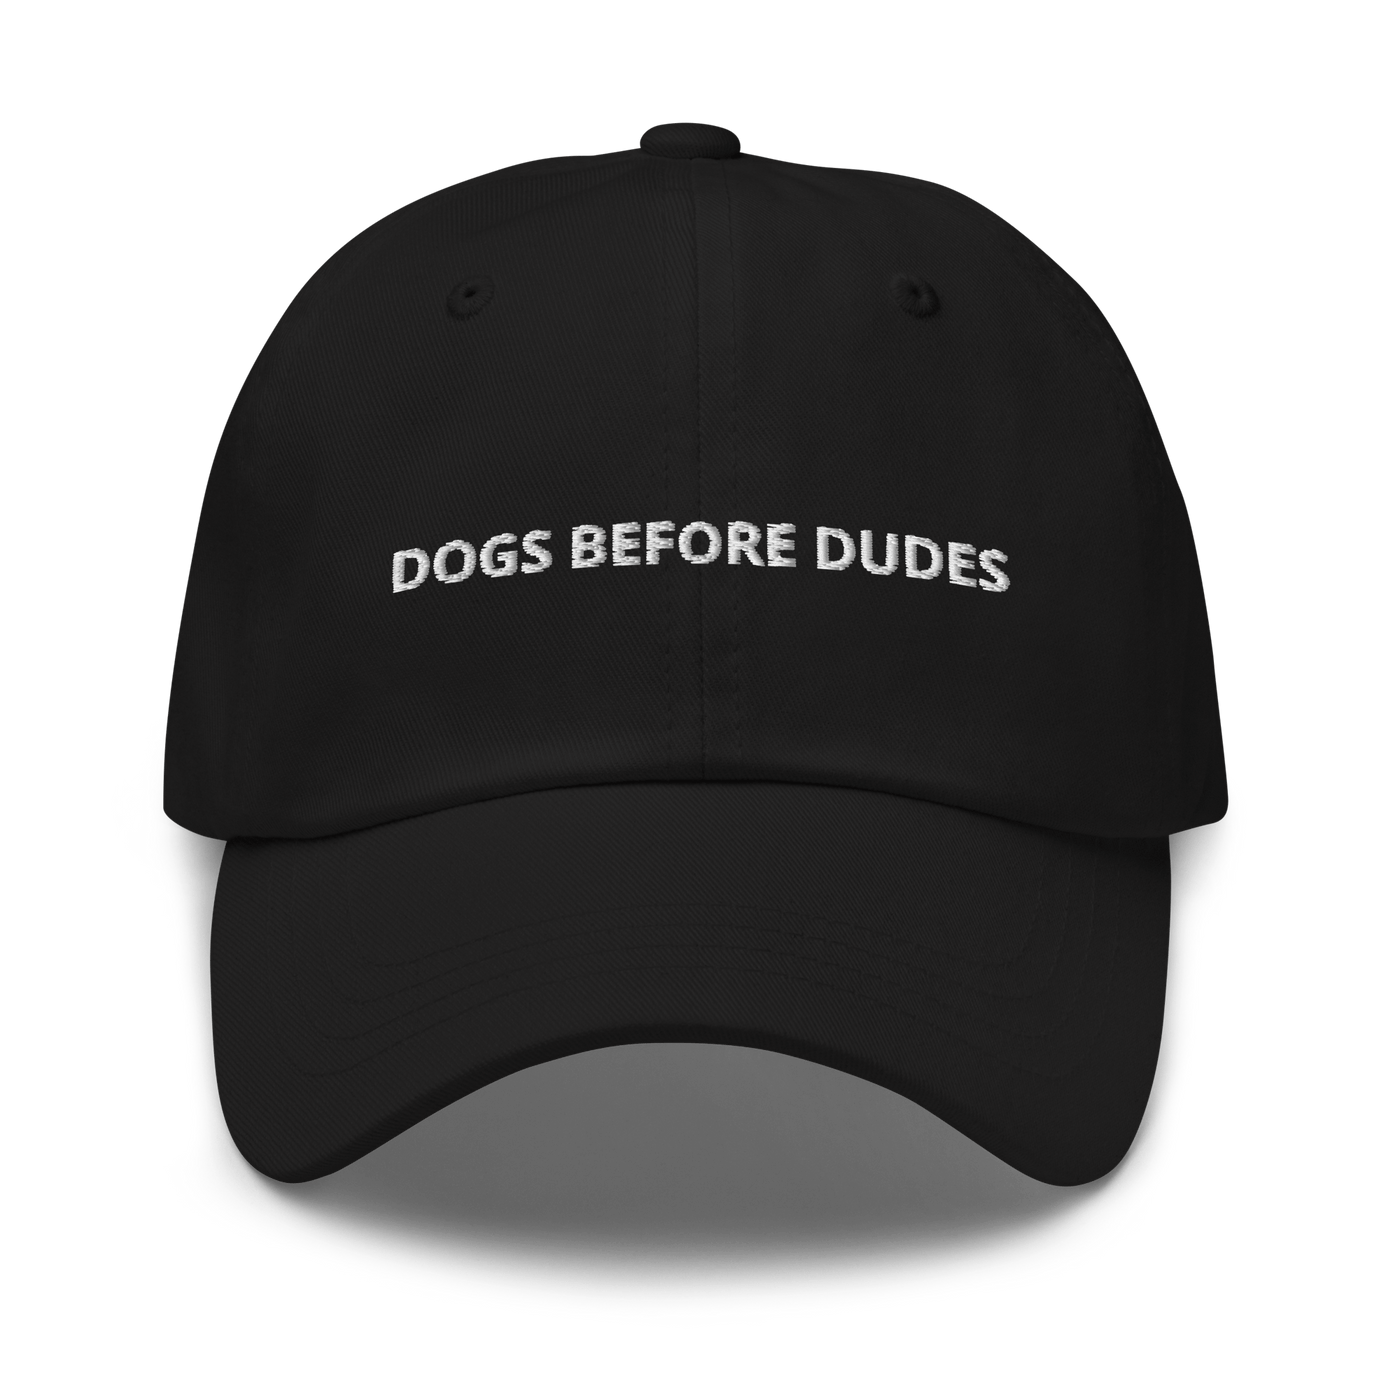 Dogs before Dudes Dad hat - Black - - Just Another Cap Store